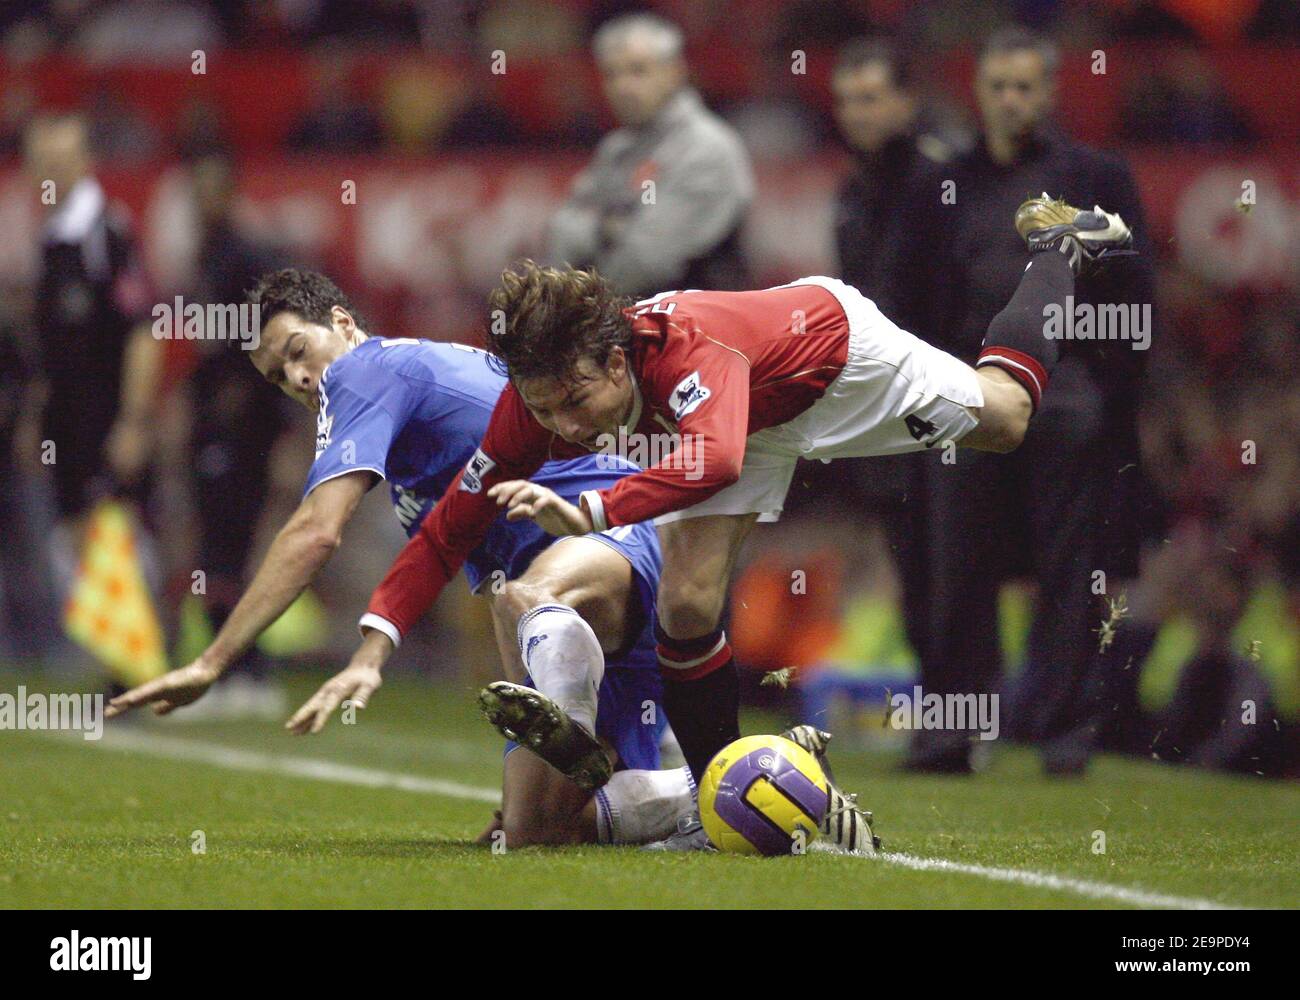 Chelsea's Michael Ballack tackles Manchester United's Gabriel Heinze during the FA Barclays Premiership, Manchester United vs Chelsea at the Old Trafford stadium in Manchester,UK on November 26, 2006. The match ended in a 1-1 draw. Photo by Christian Liewig/ABACAPRESS.COM Stock Photo